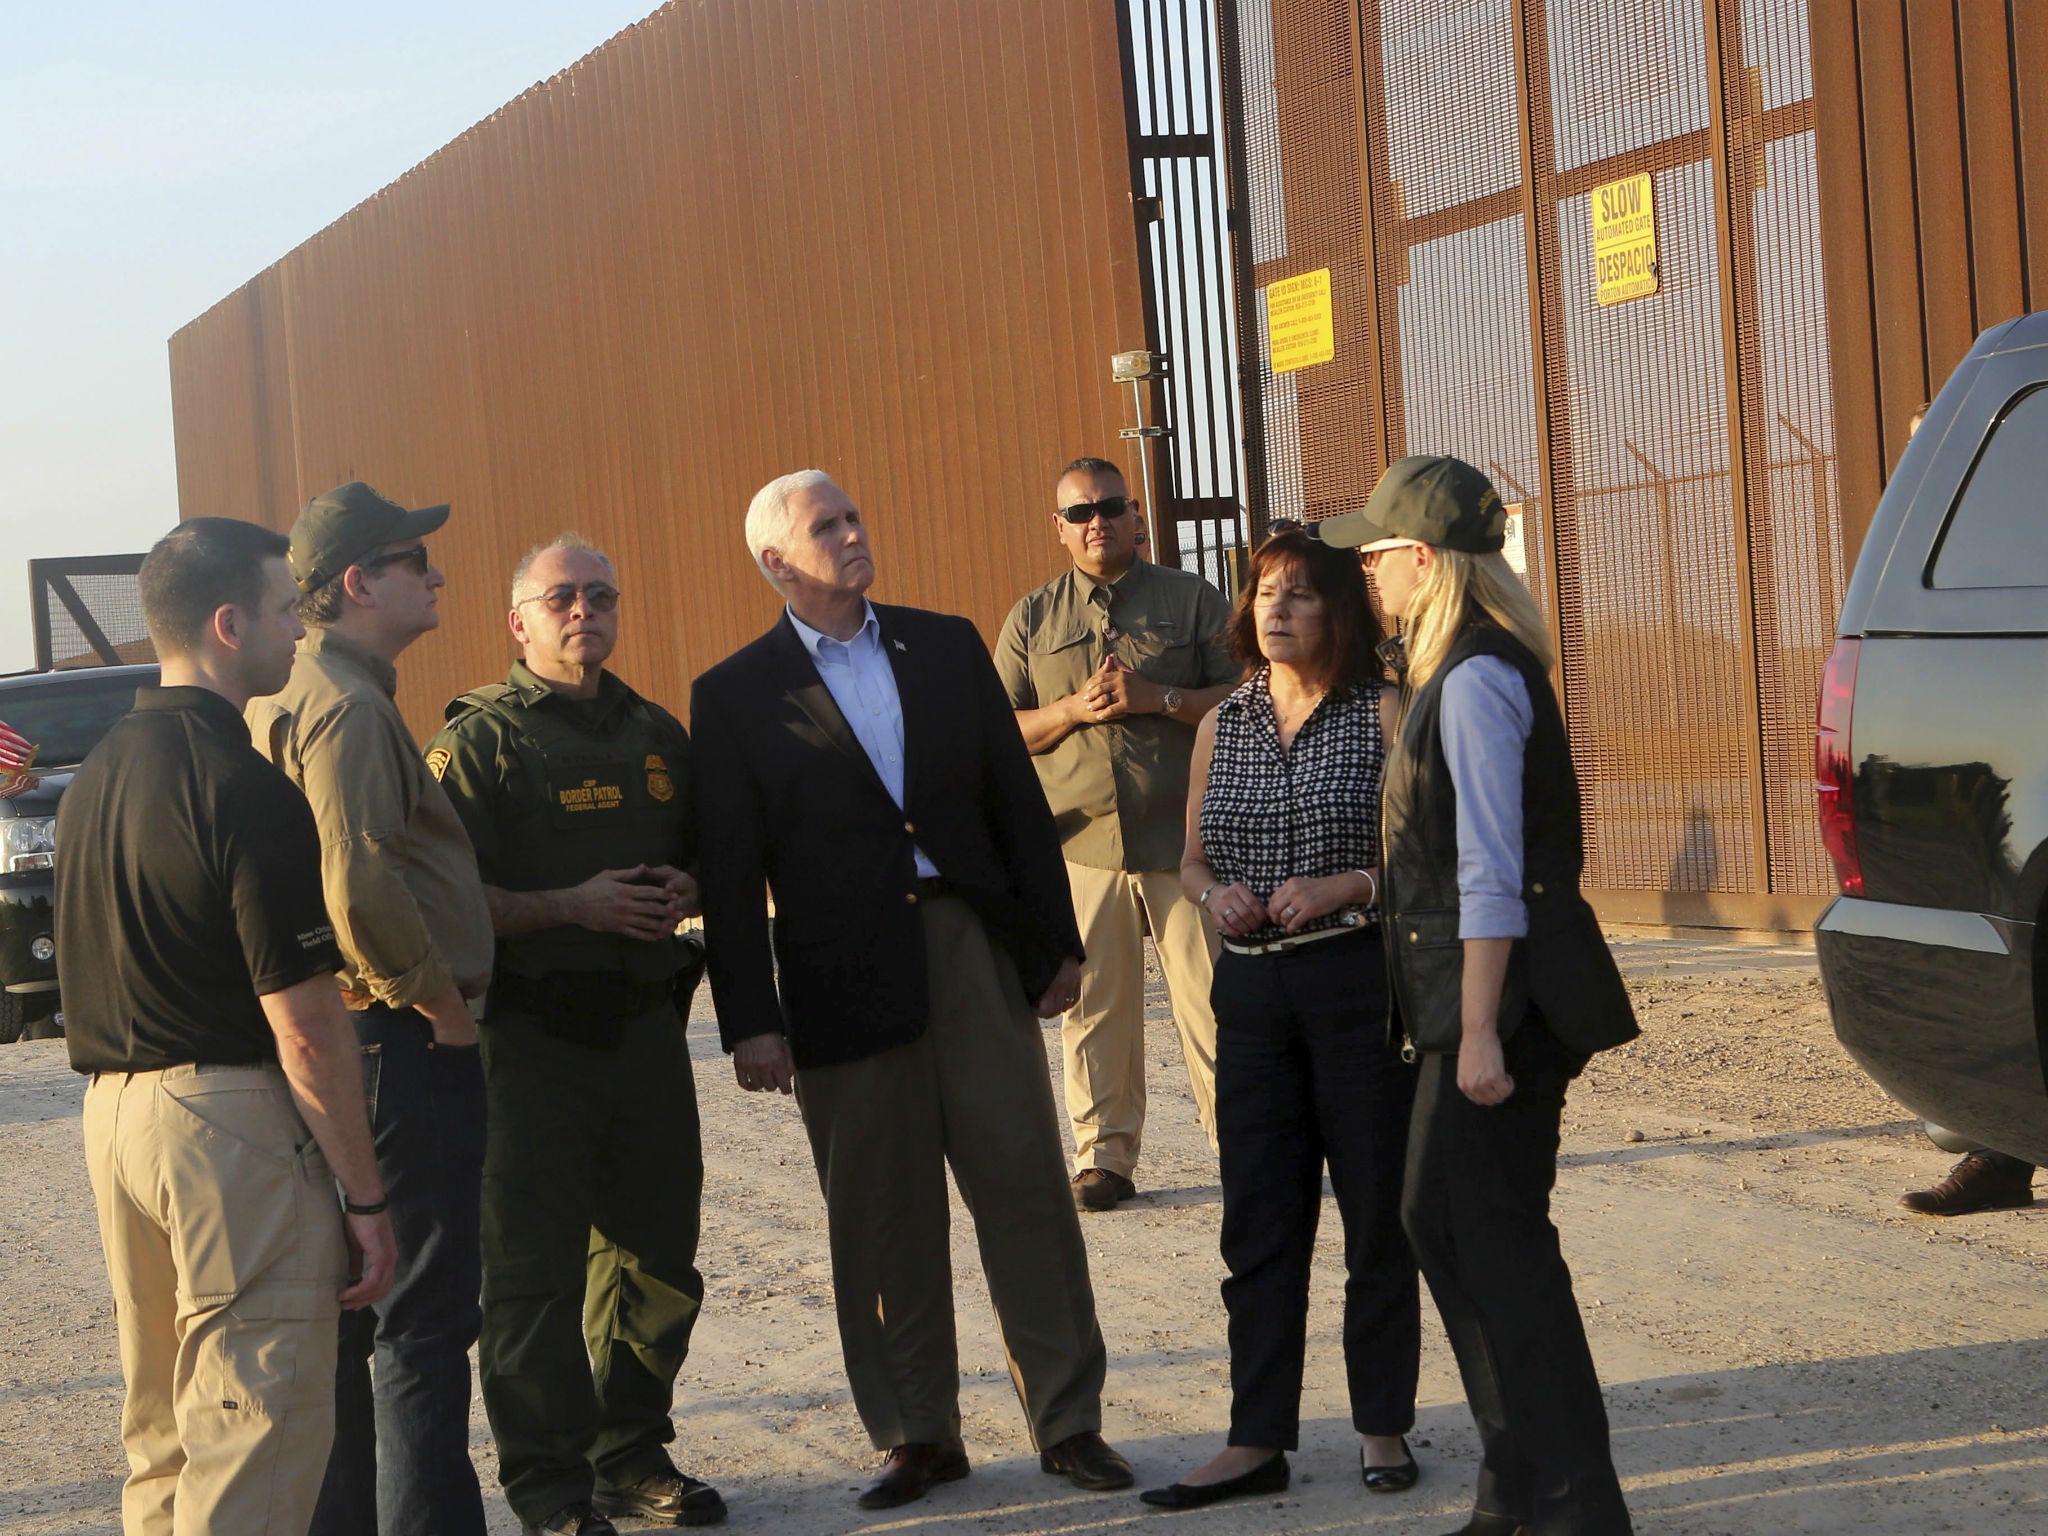 Mike Pence tours the border wall in Hidalgo, Texas